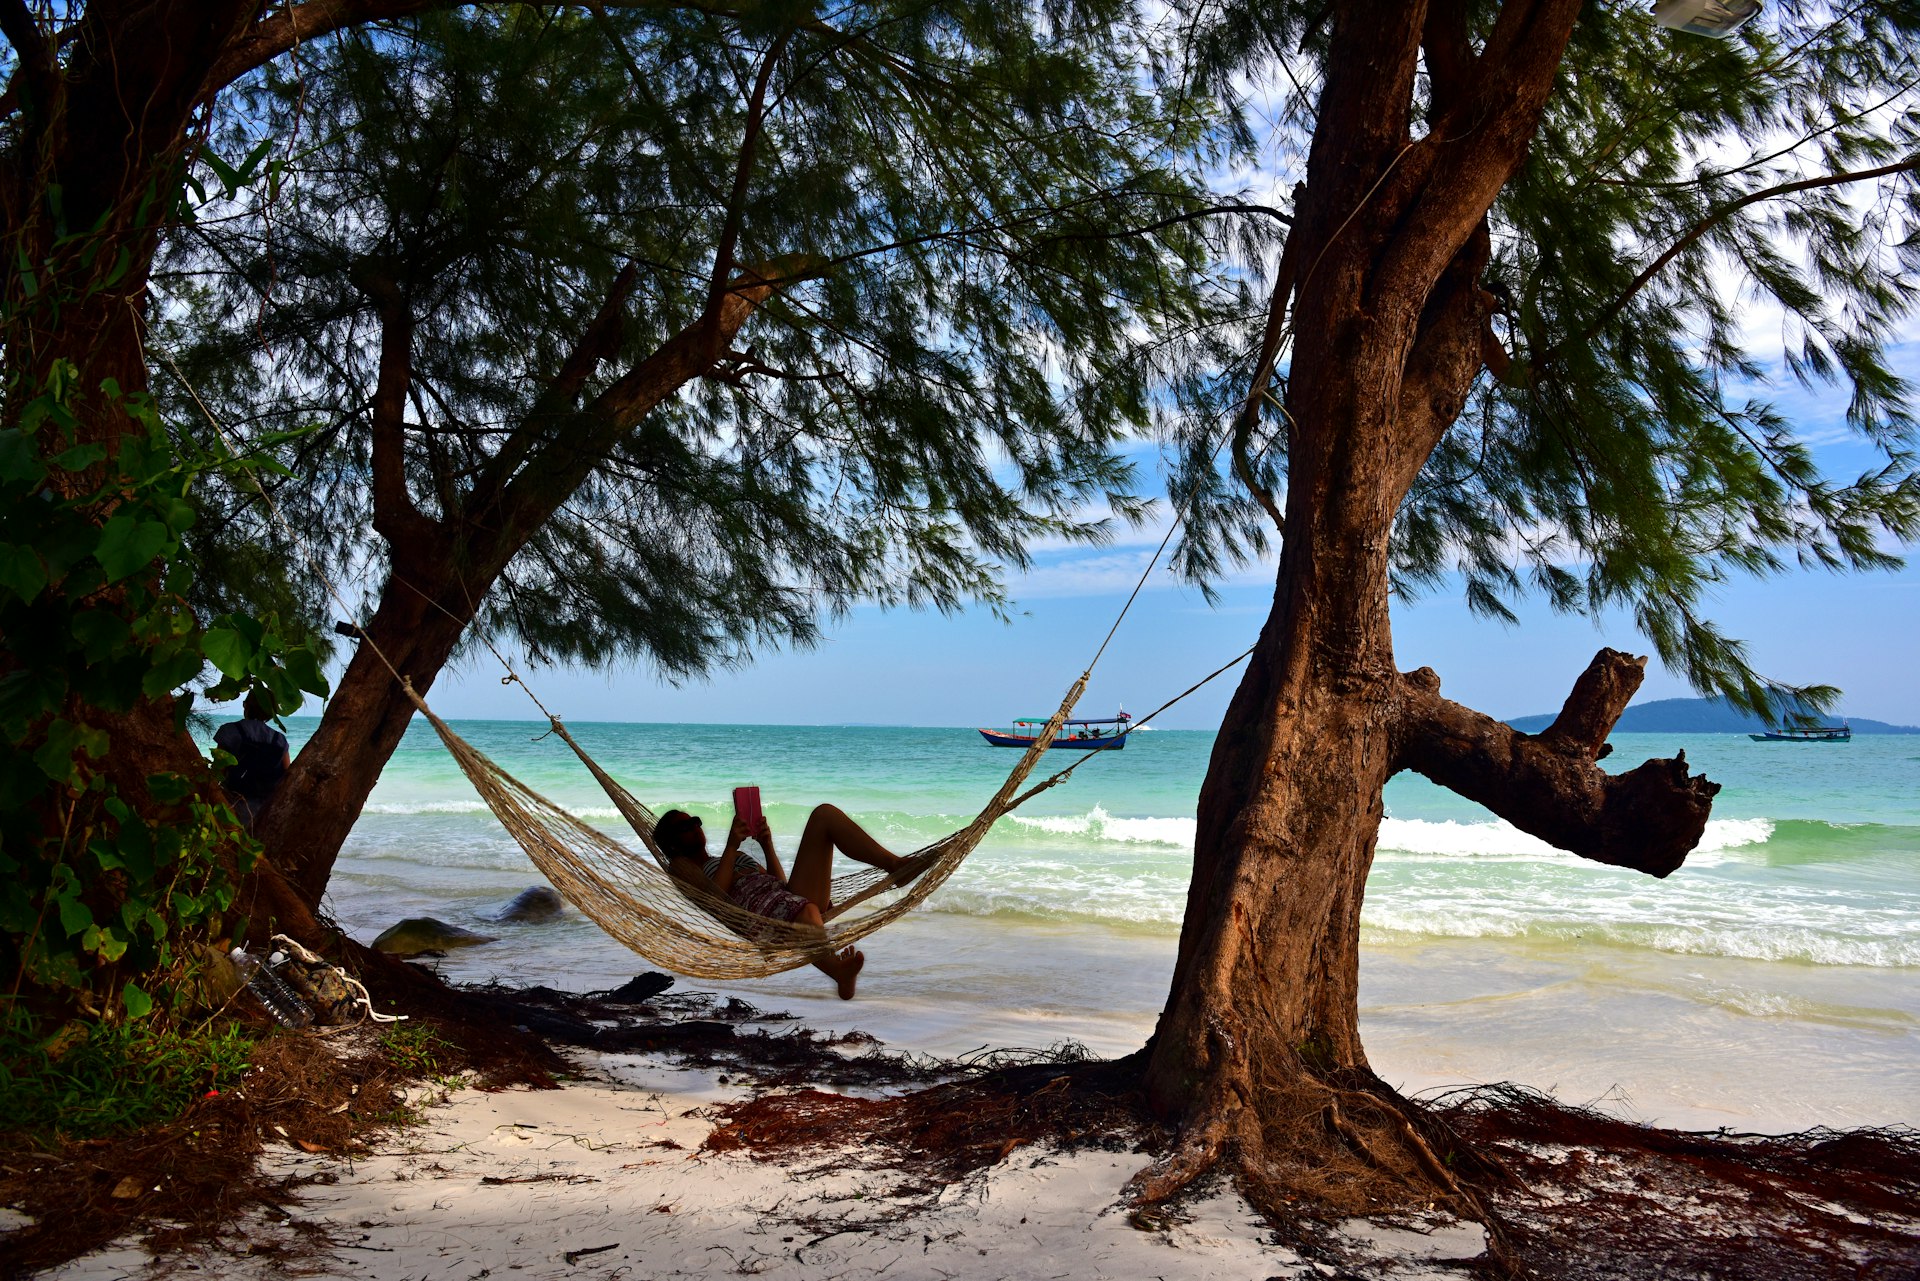 A woman lounges in a hammock in the shade on the shores of Koh Rong